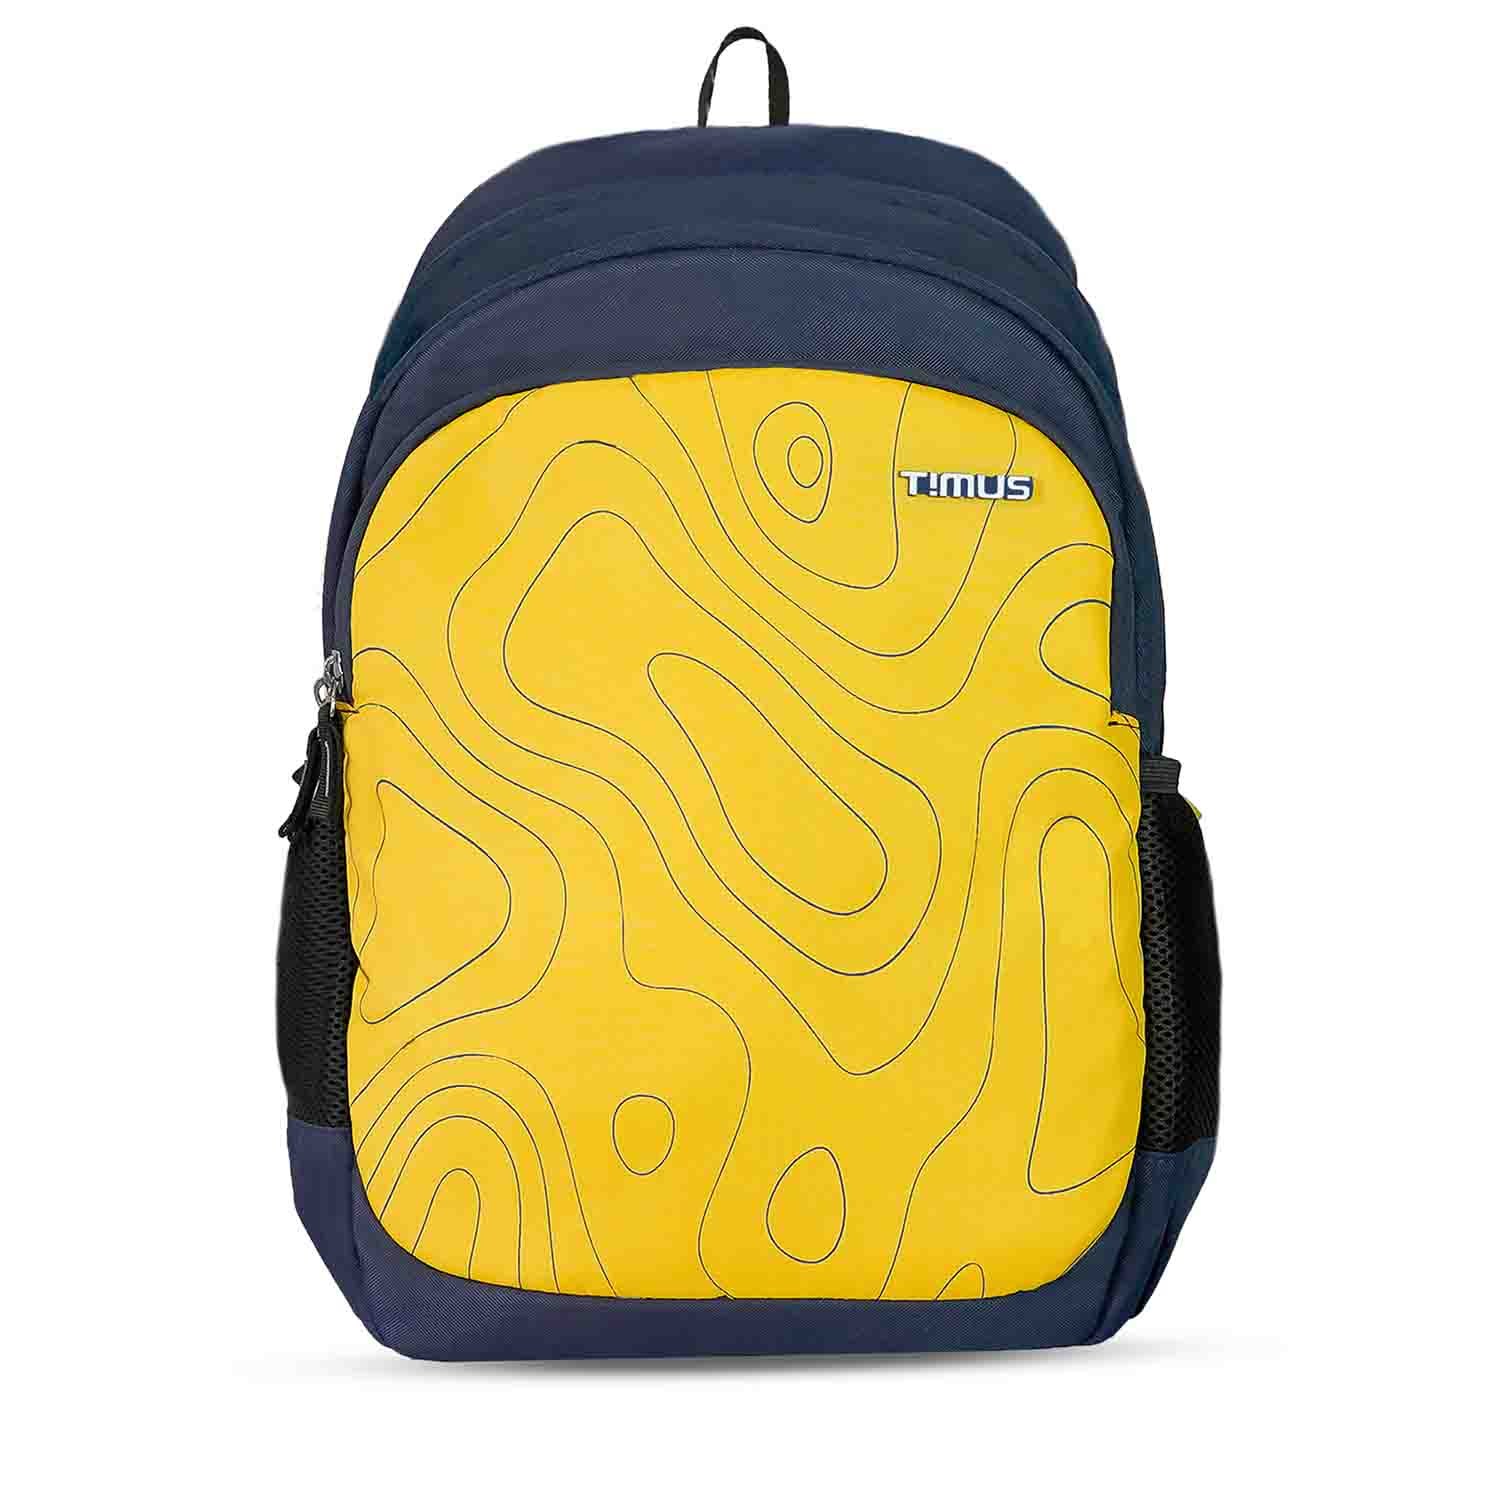 Timus-Lifestyle-backpacks-casual-backpacks-Chile-Casual-Backpack-Yellow-1